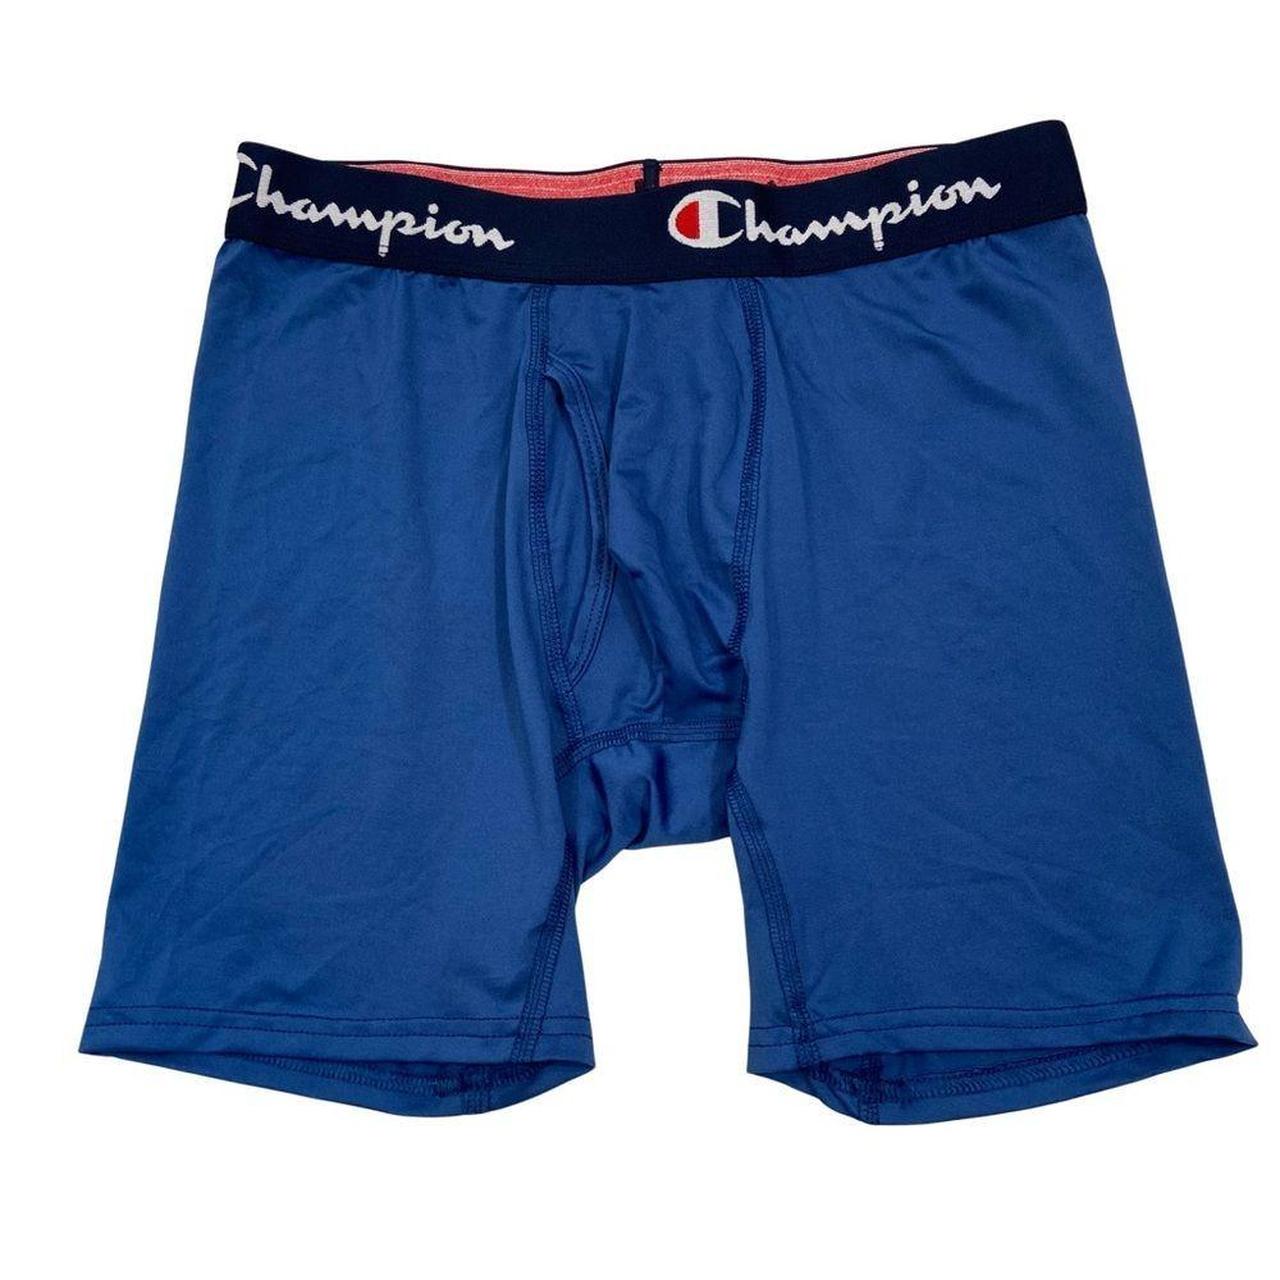 Homemade Champion Underwear I made this from a - Depop